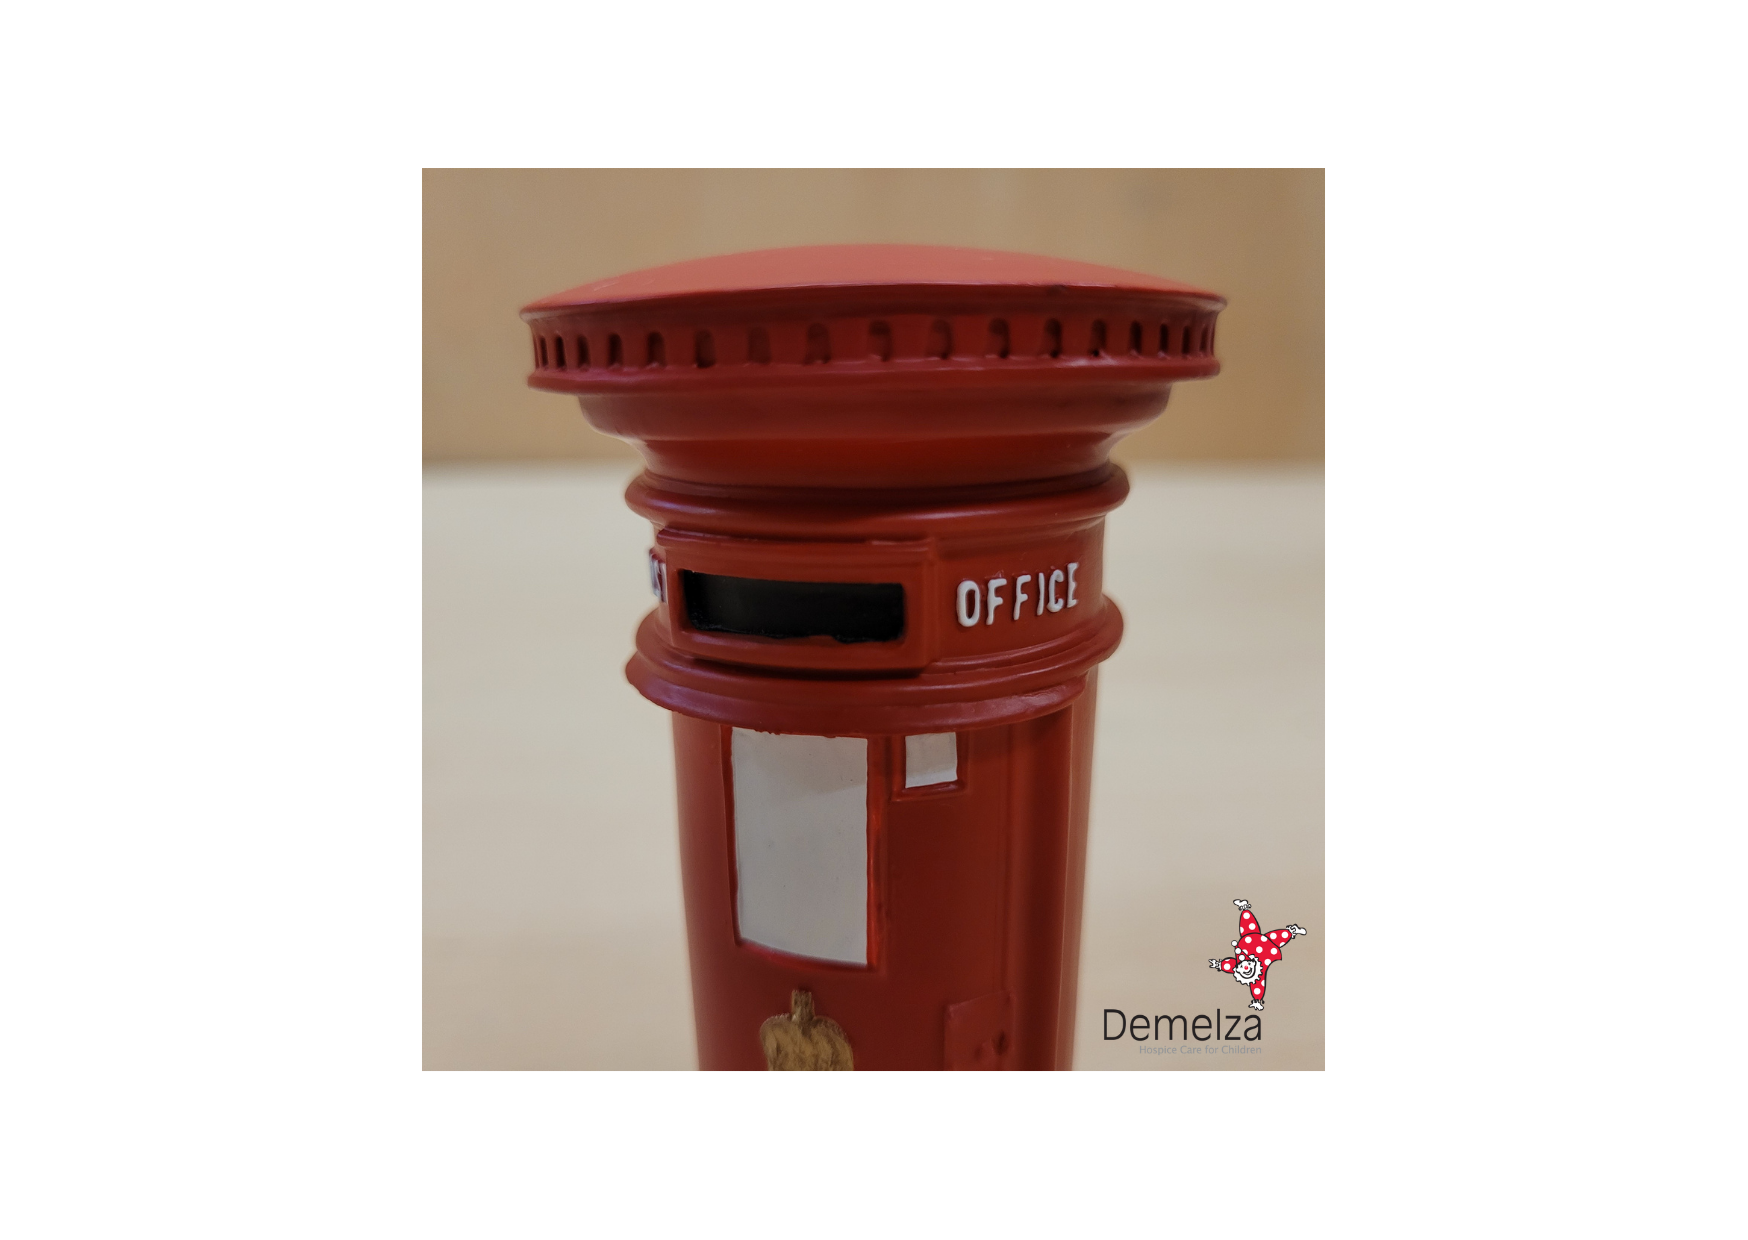 Dolls House 1:12 Scale Post Box Close Up Top View